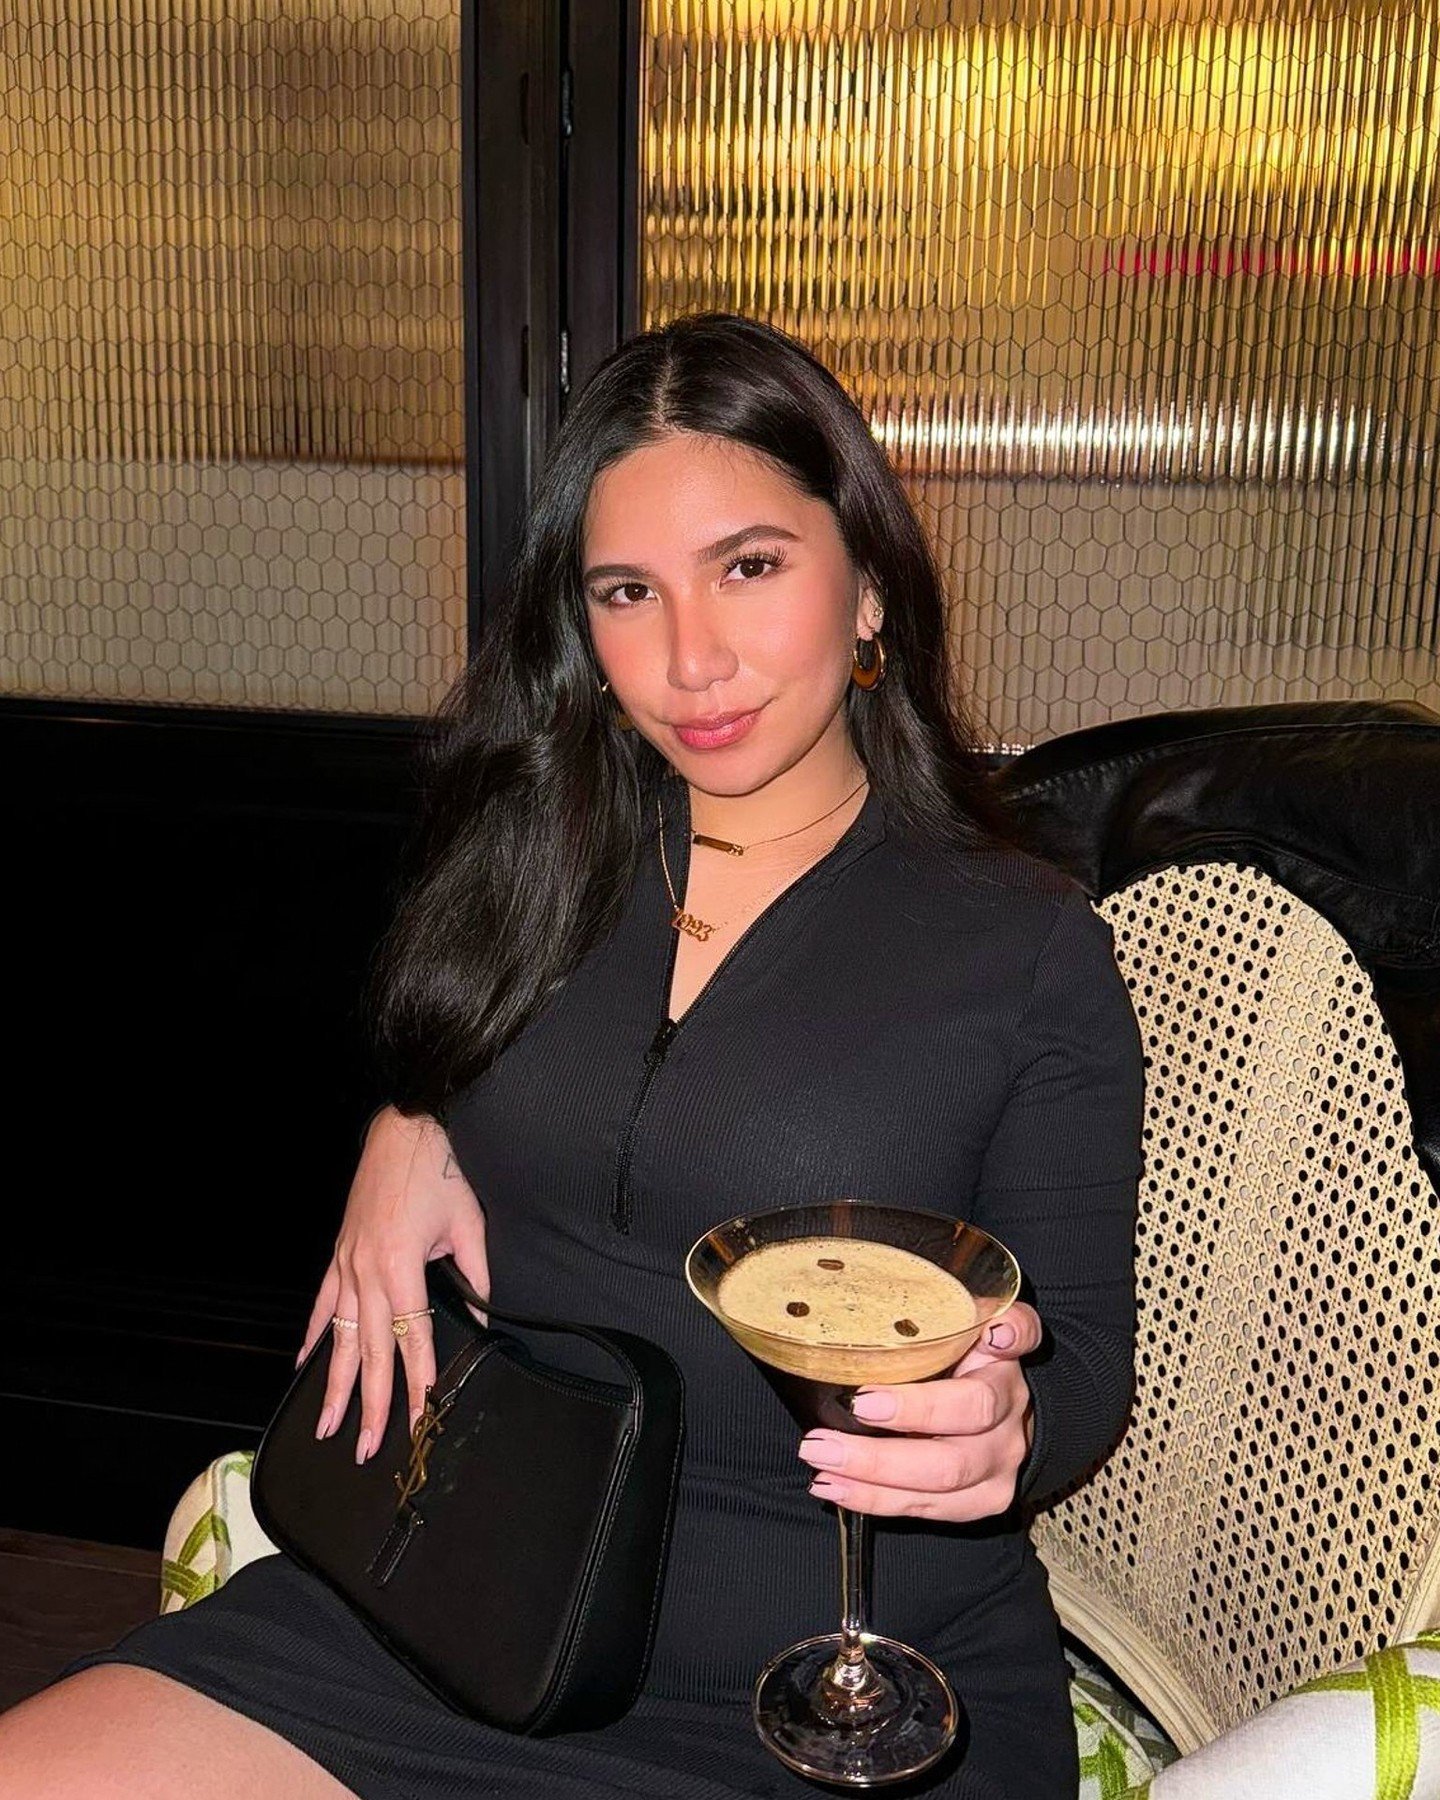 ⁠Because sometimes all you need is a good espresso martini and an evening out at Bar Lesieur 🍸️☕️✨️⁠
⁠
📸: @krishxnvh⁠
⁠
#BarLesieur #SchulsonCollective #datenight #phillyhappyhour #frenchfood #girlsnightout